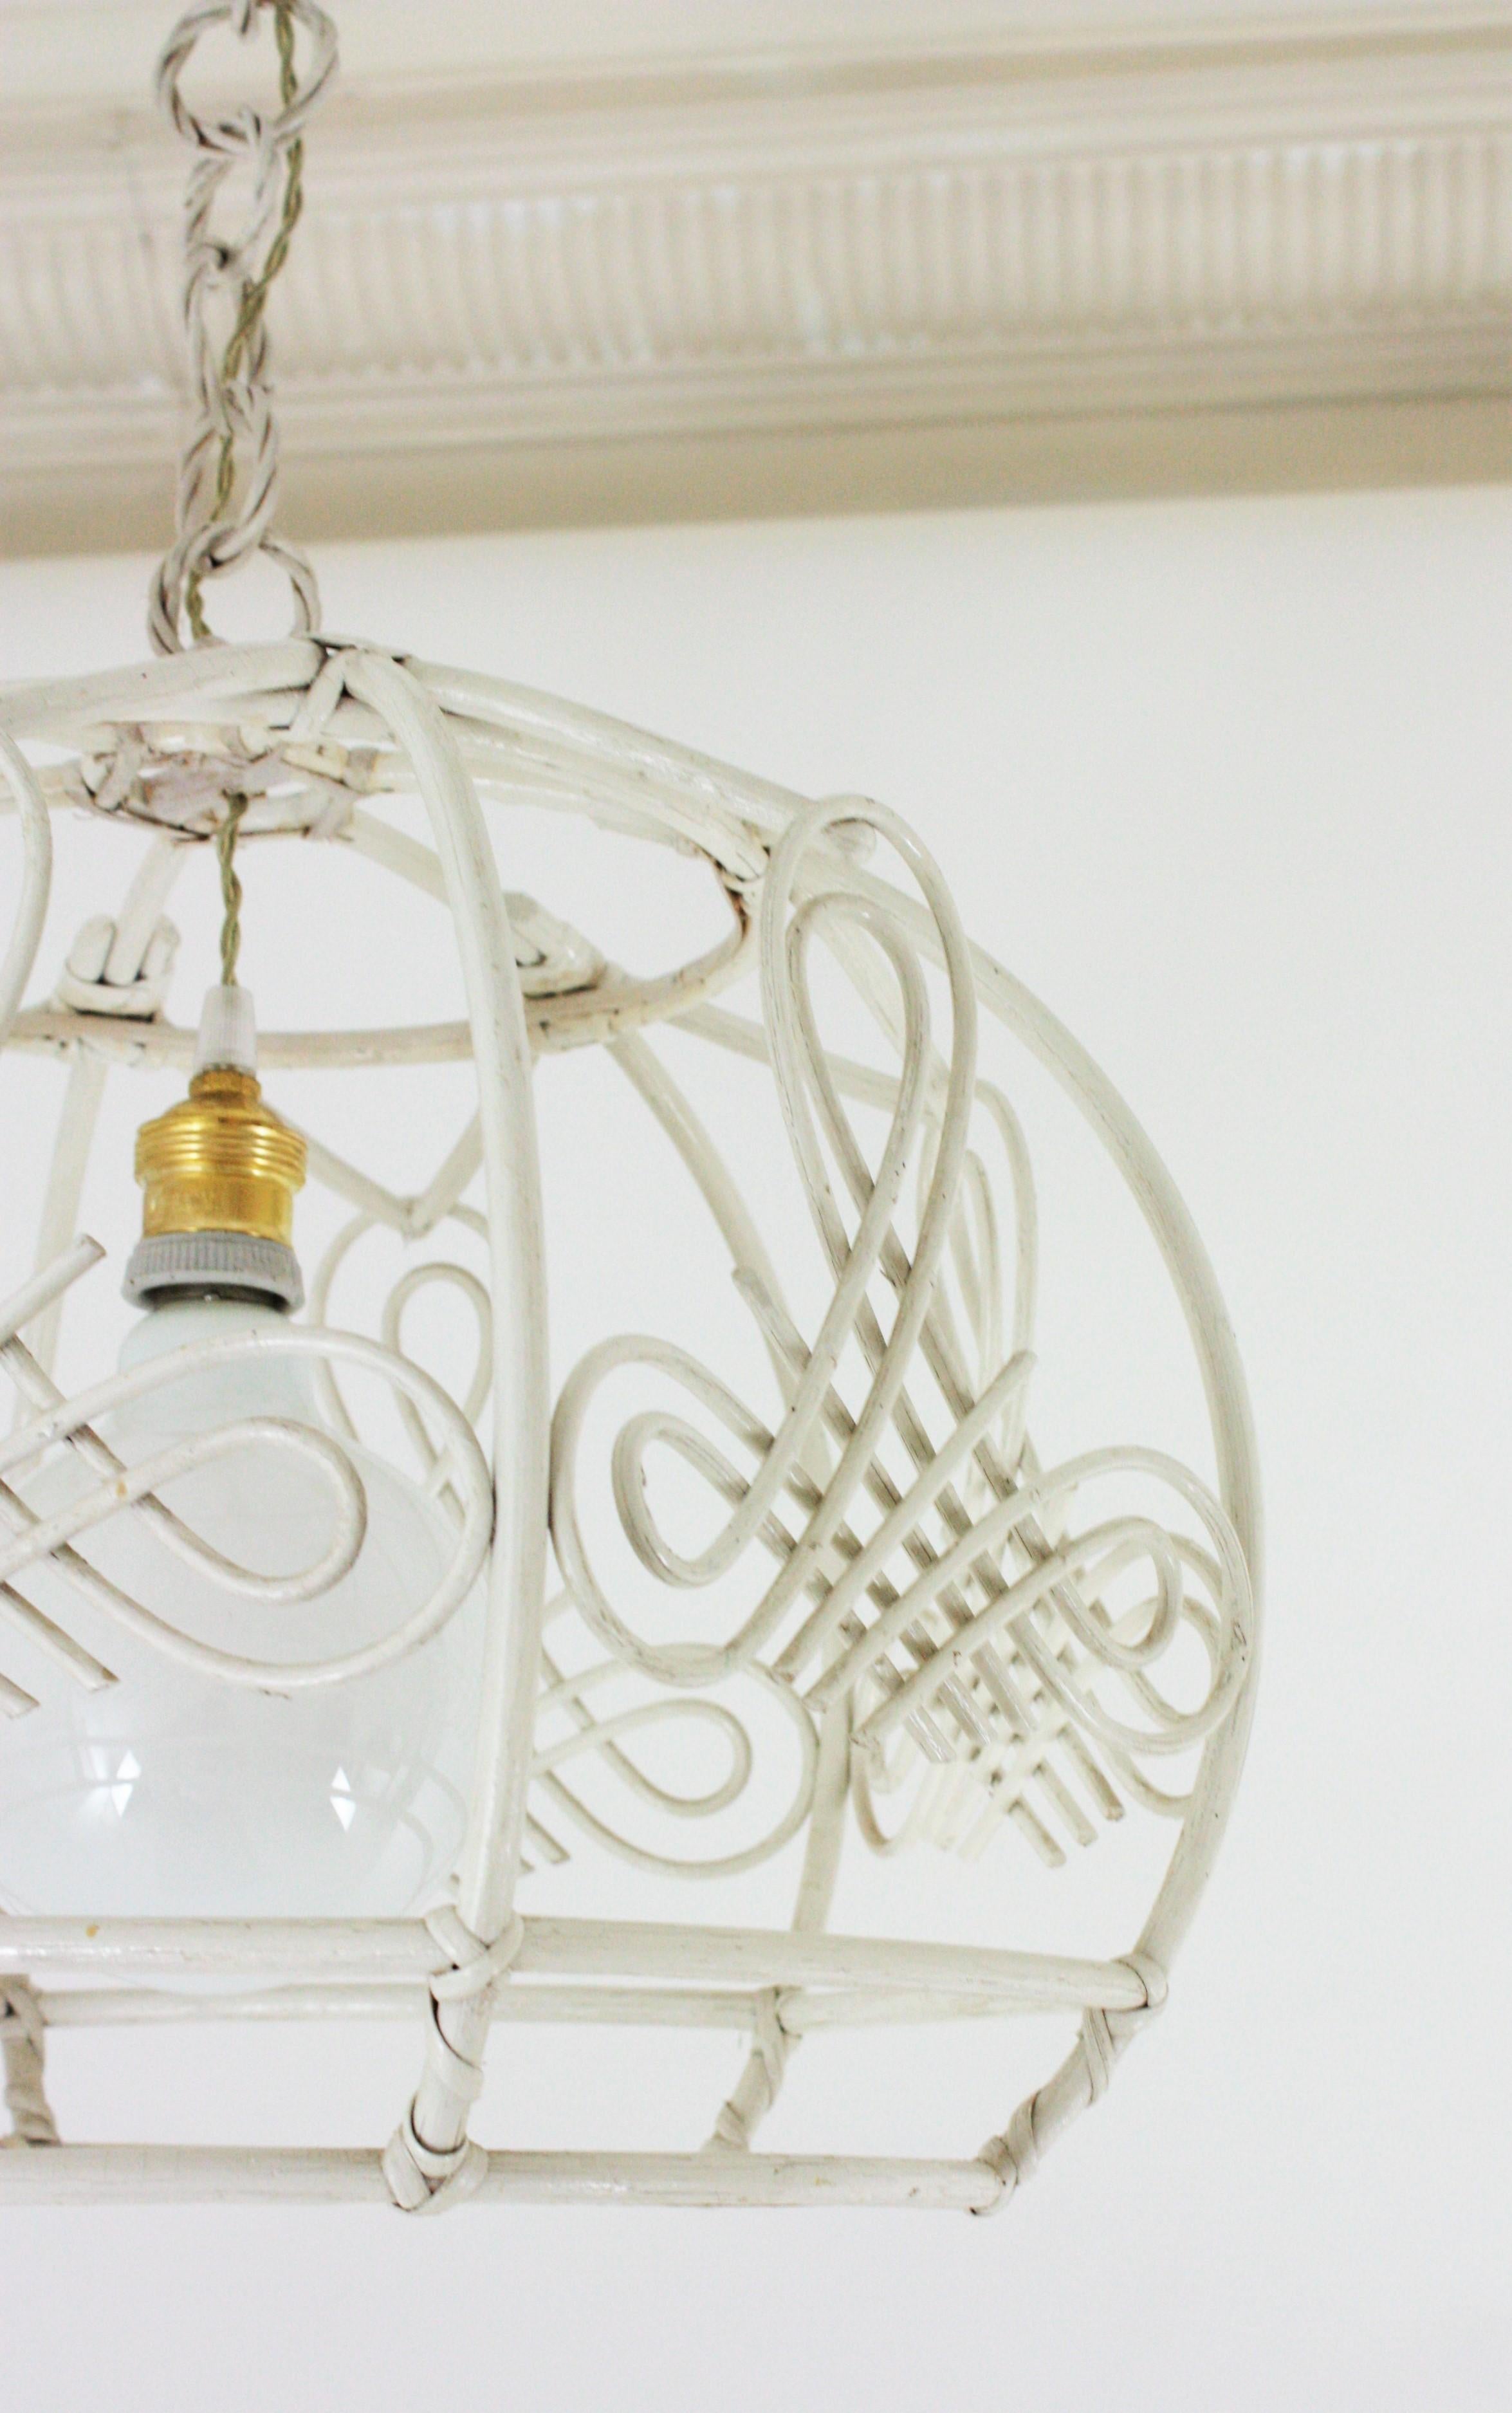 French Rattan Bell Pendant Lamp / Lantern in White Patina, 1960s For Sale 6